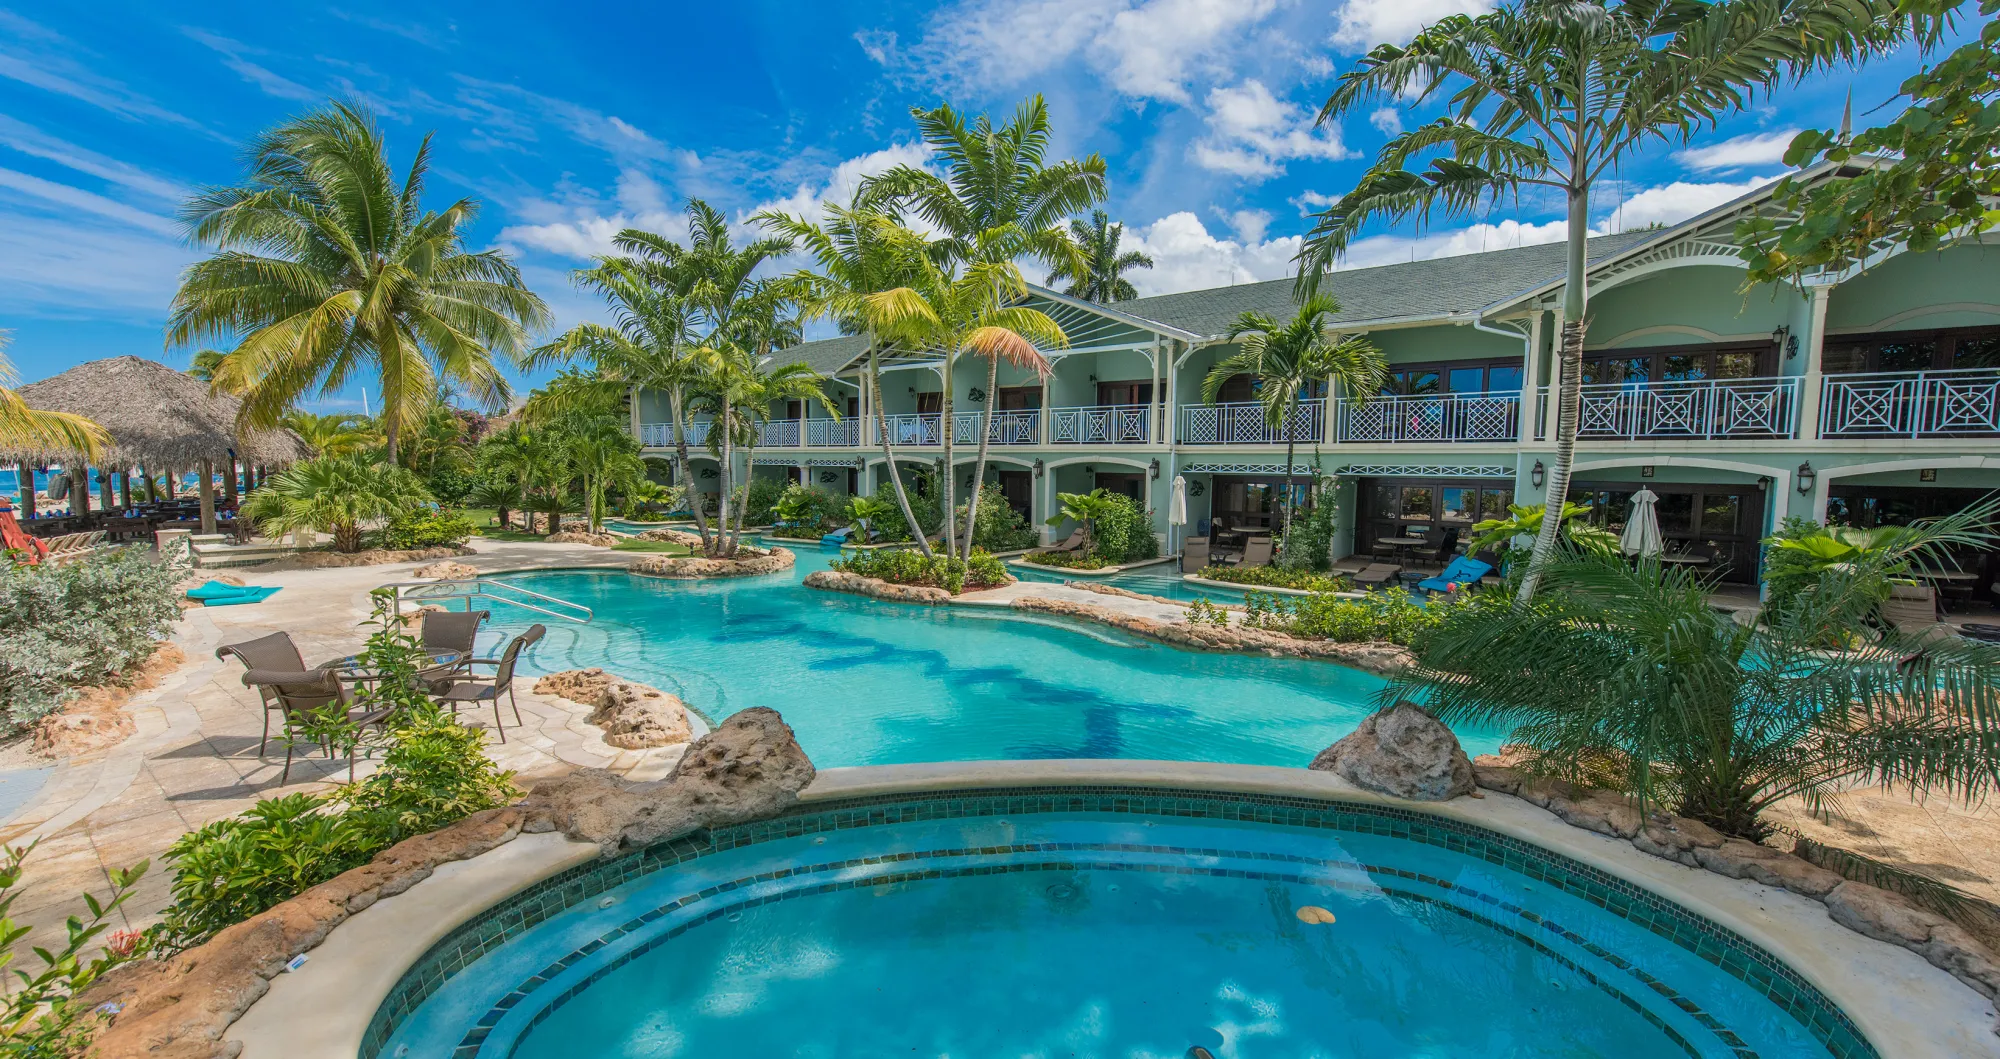 The Most Affordable Sandals Resorts for Couples in Jamaica